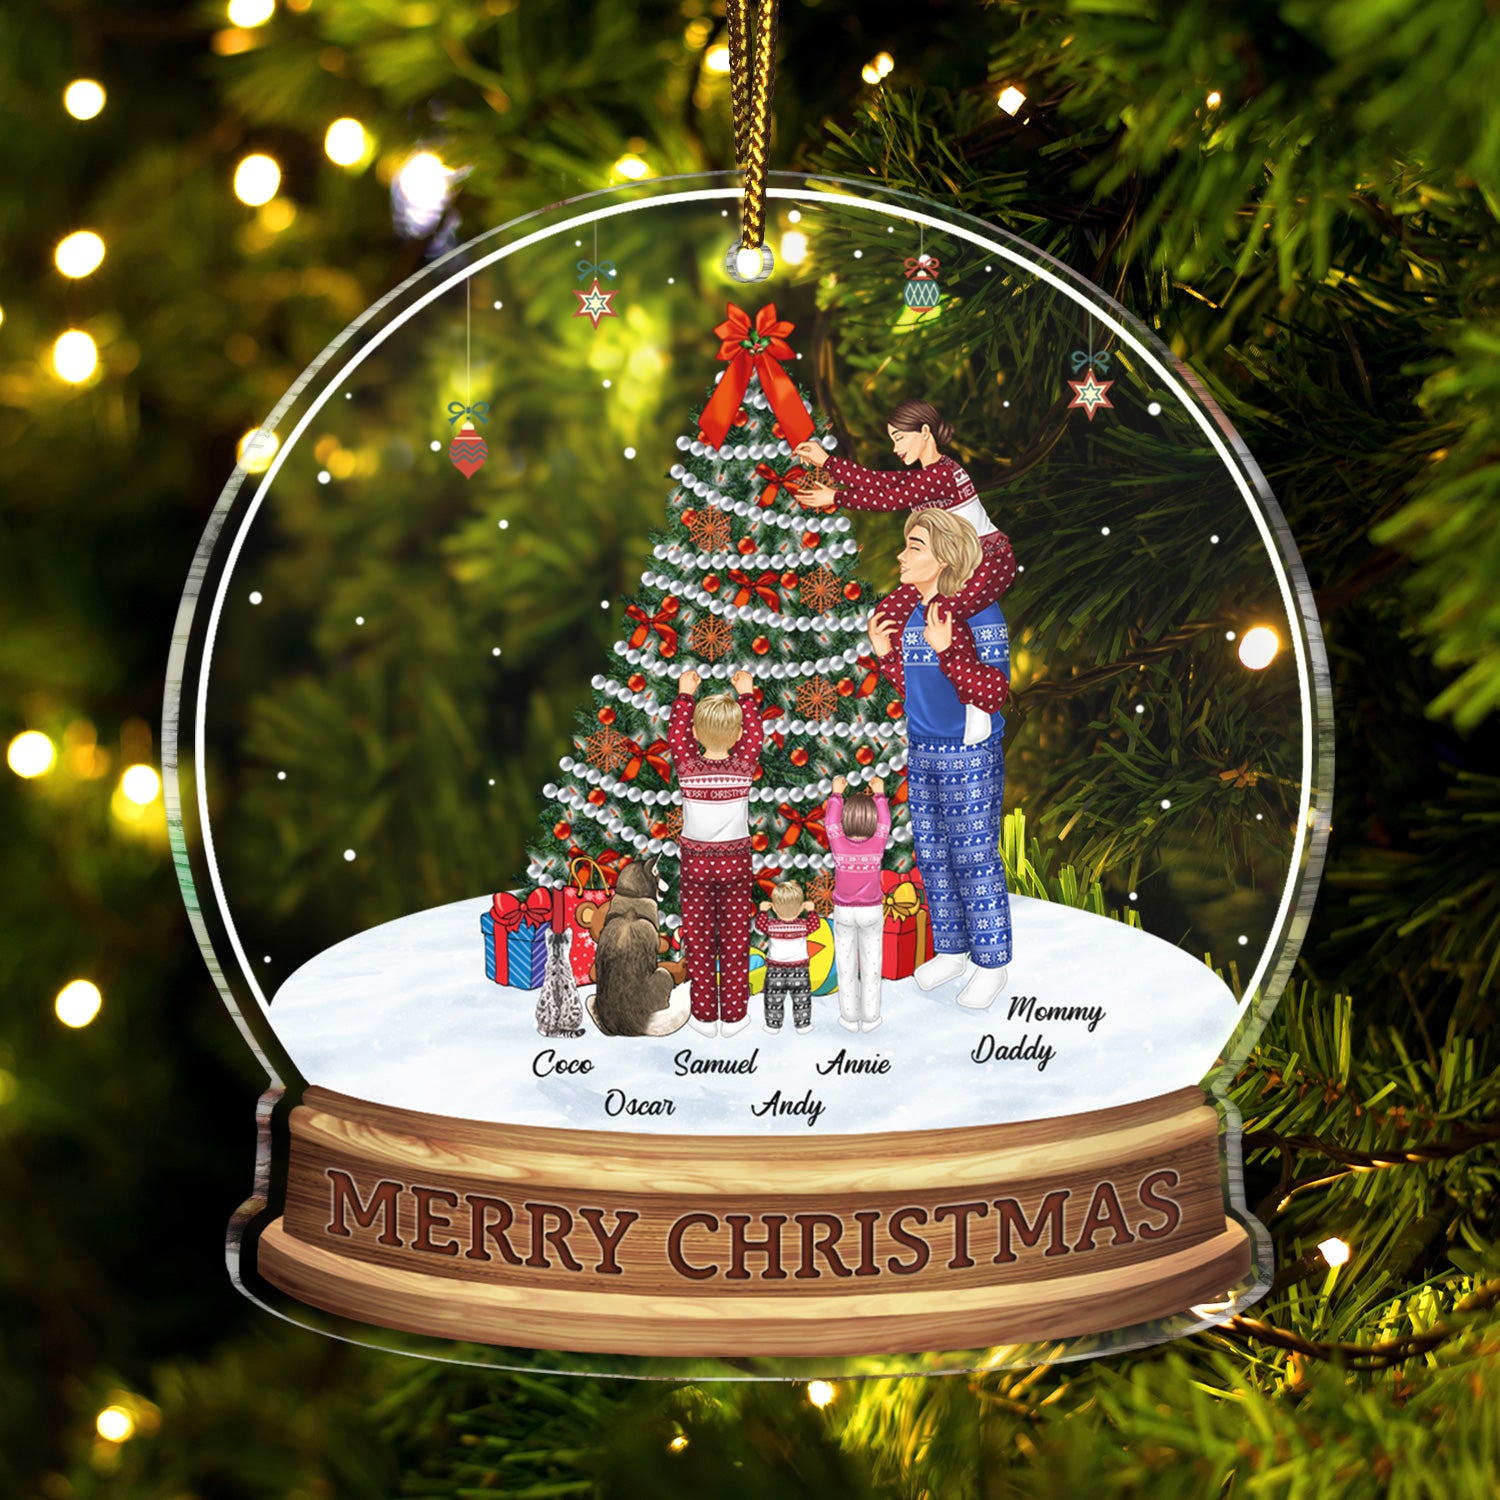 Merry Christmas Family Decor Home - Gift For Parents, Couples, Pet Lovers - Personalized Custom Shaped Acrylic Ornament